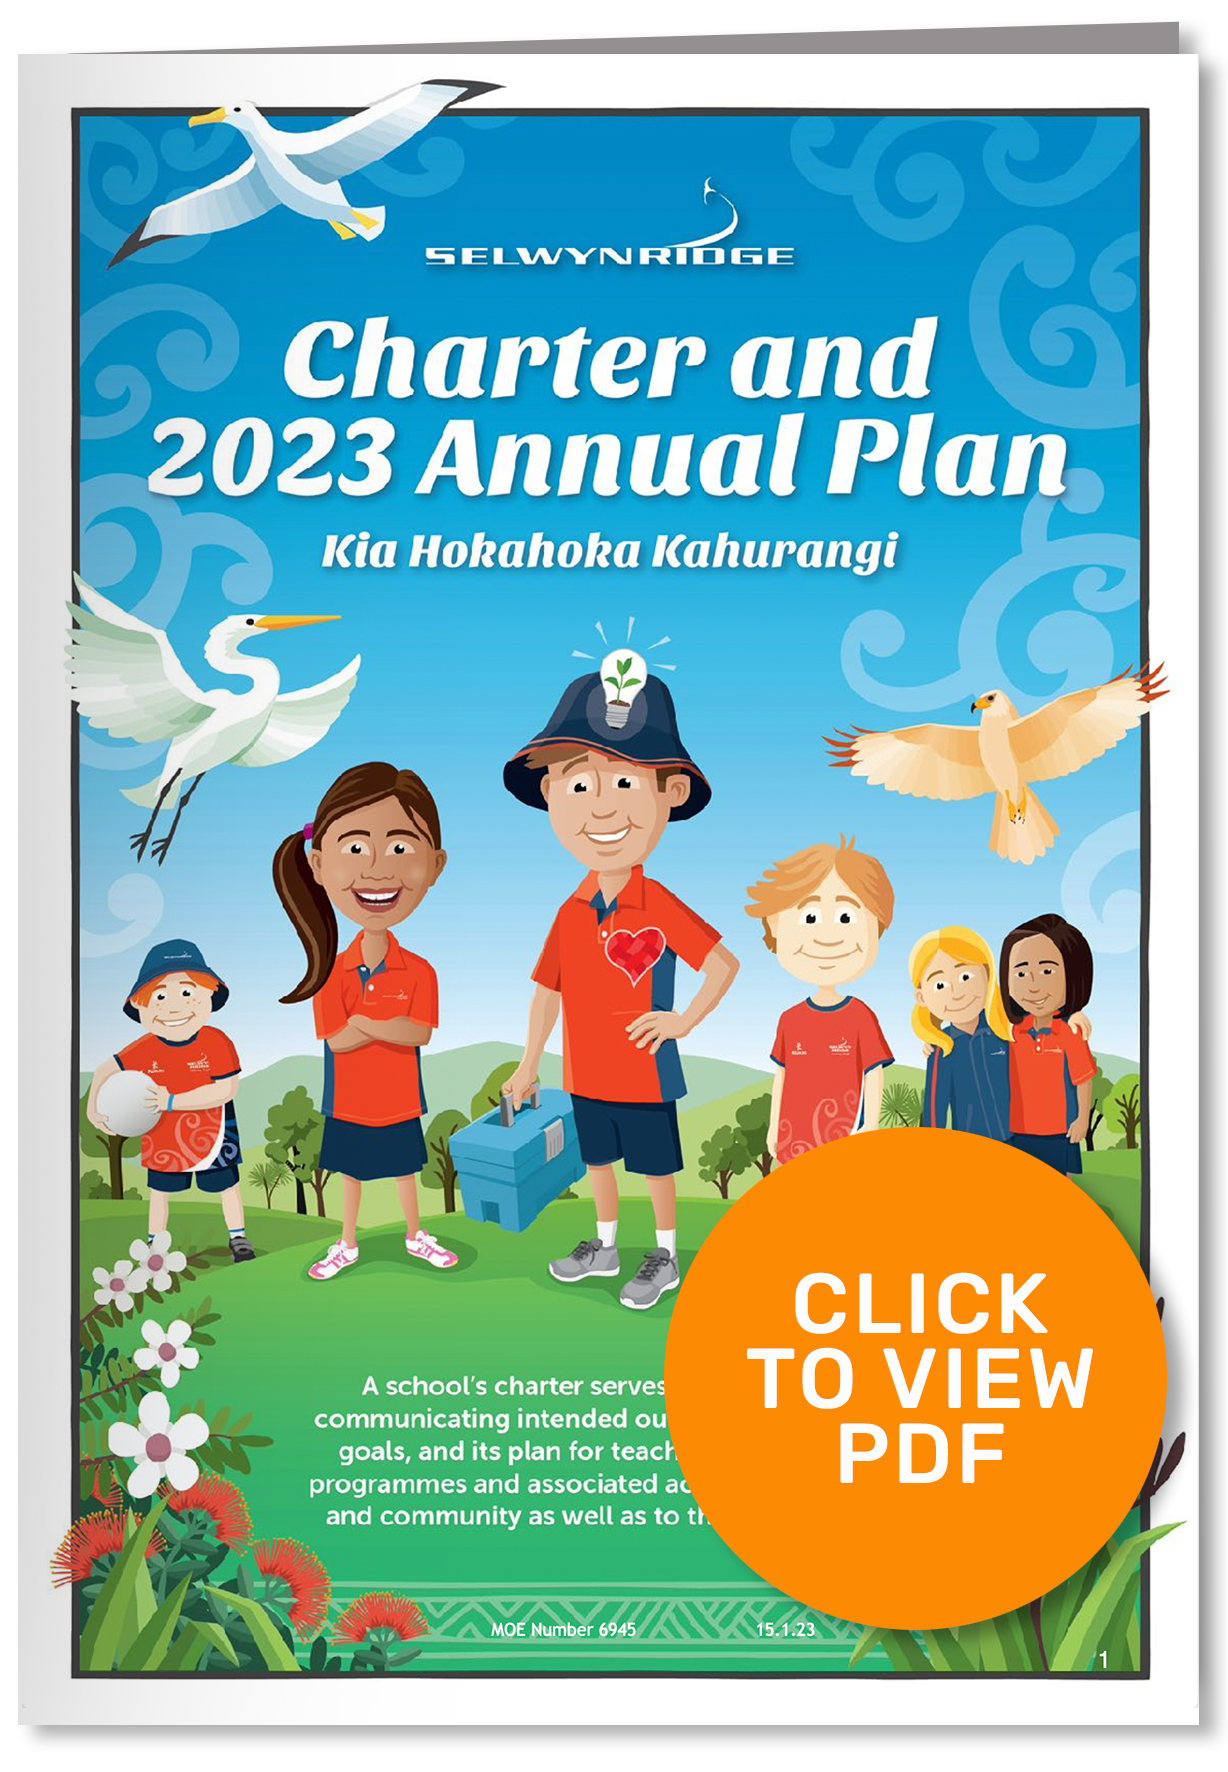 Charter and 2023 Annual Plan cover.jpg